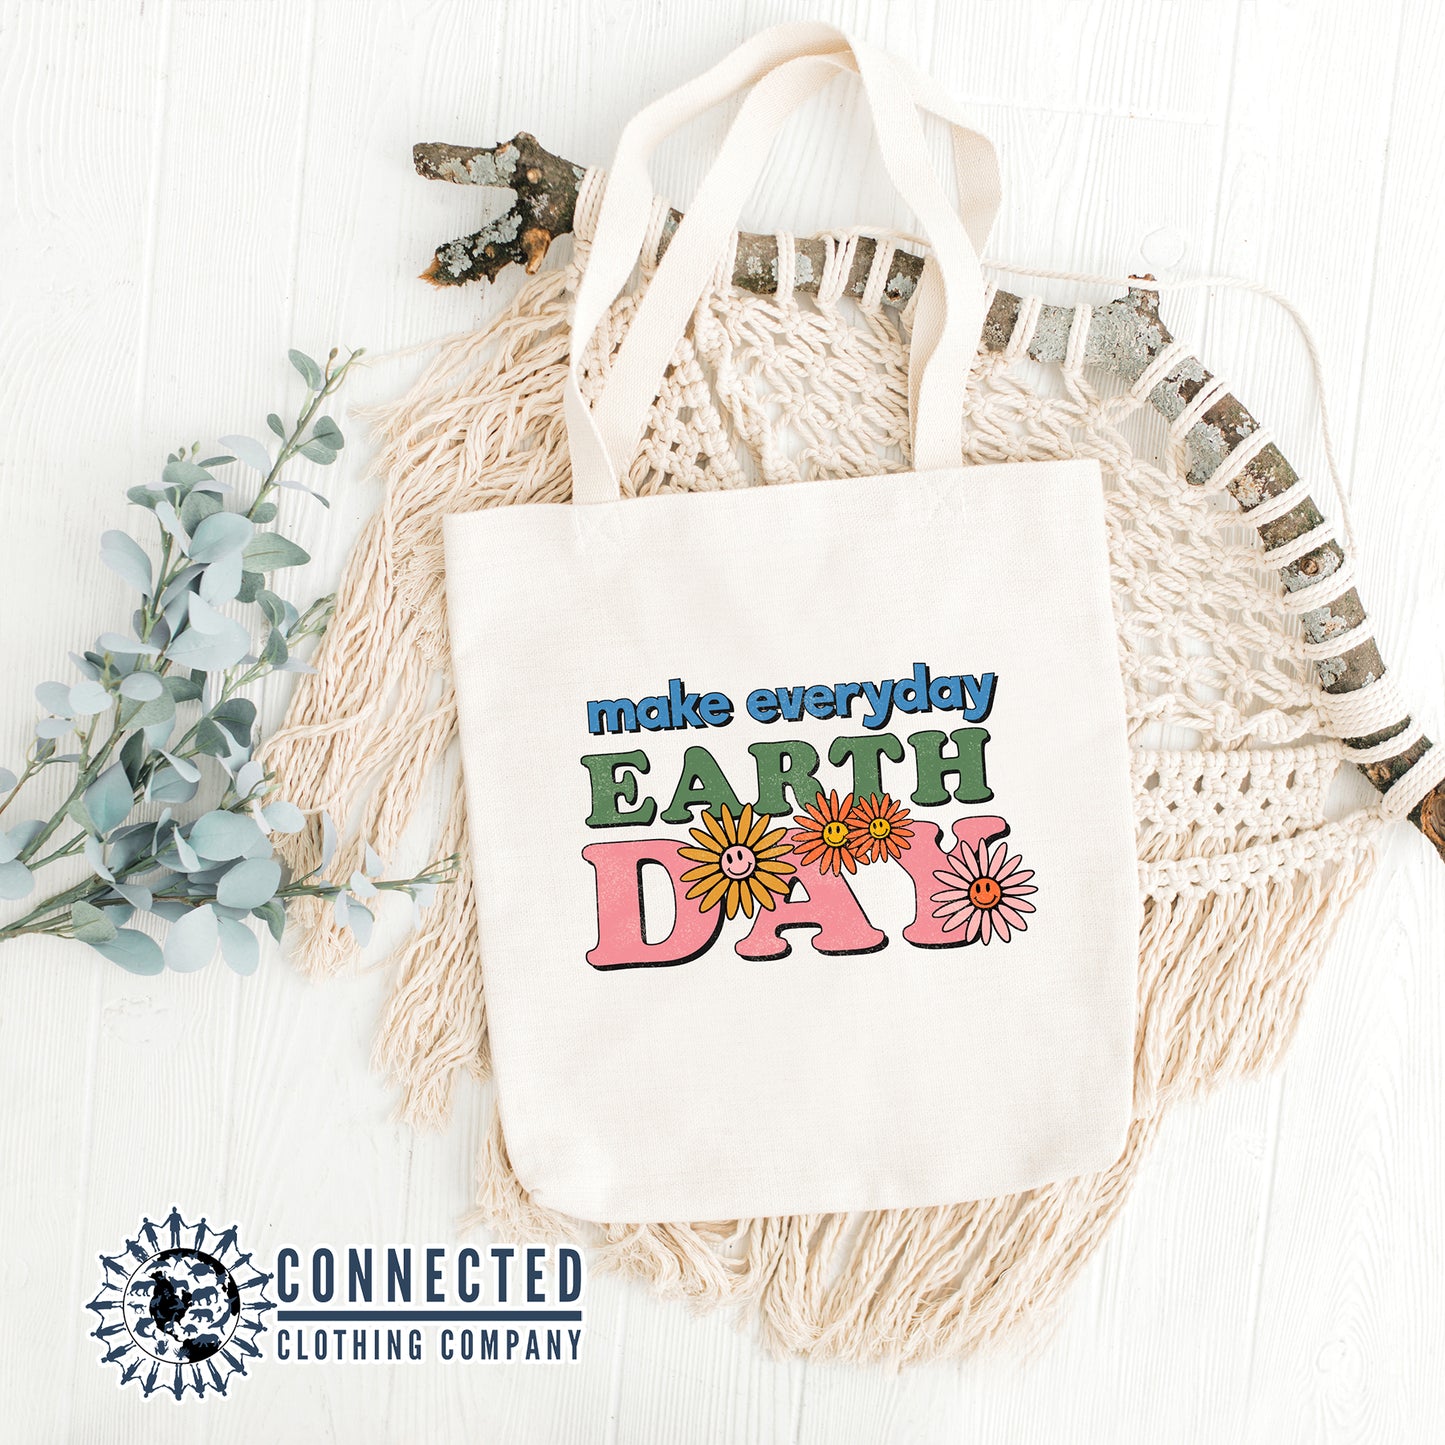 Make Earth Day Every Day - Connected Clothing Company - 10% donated to ocean conservation